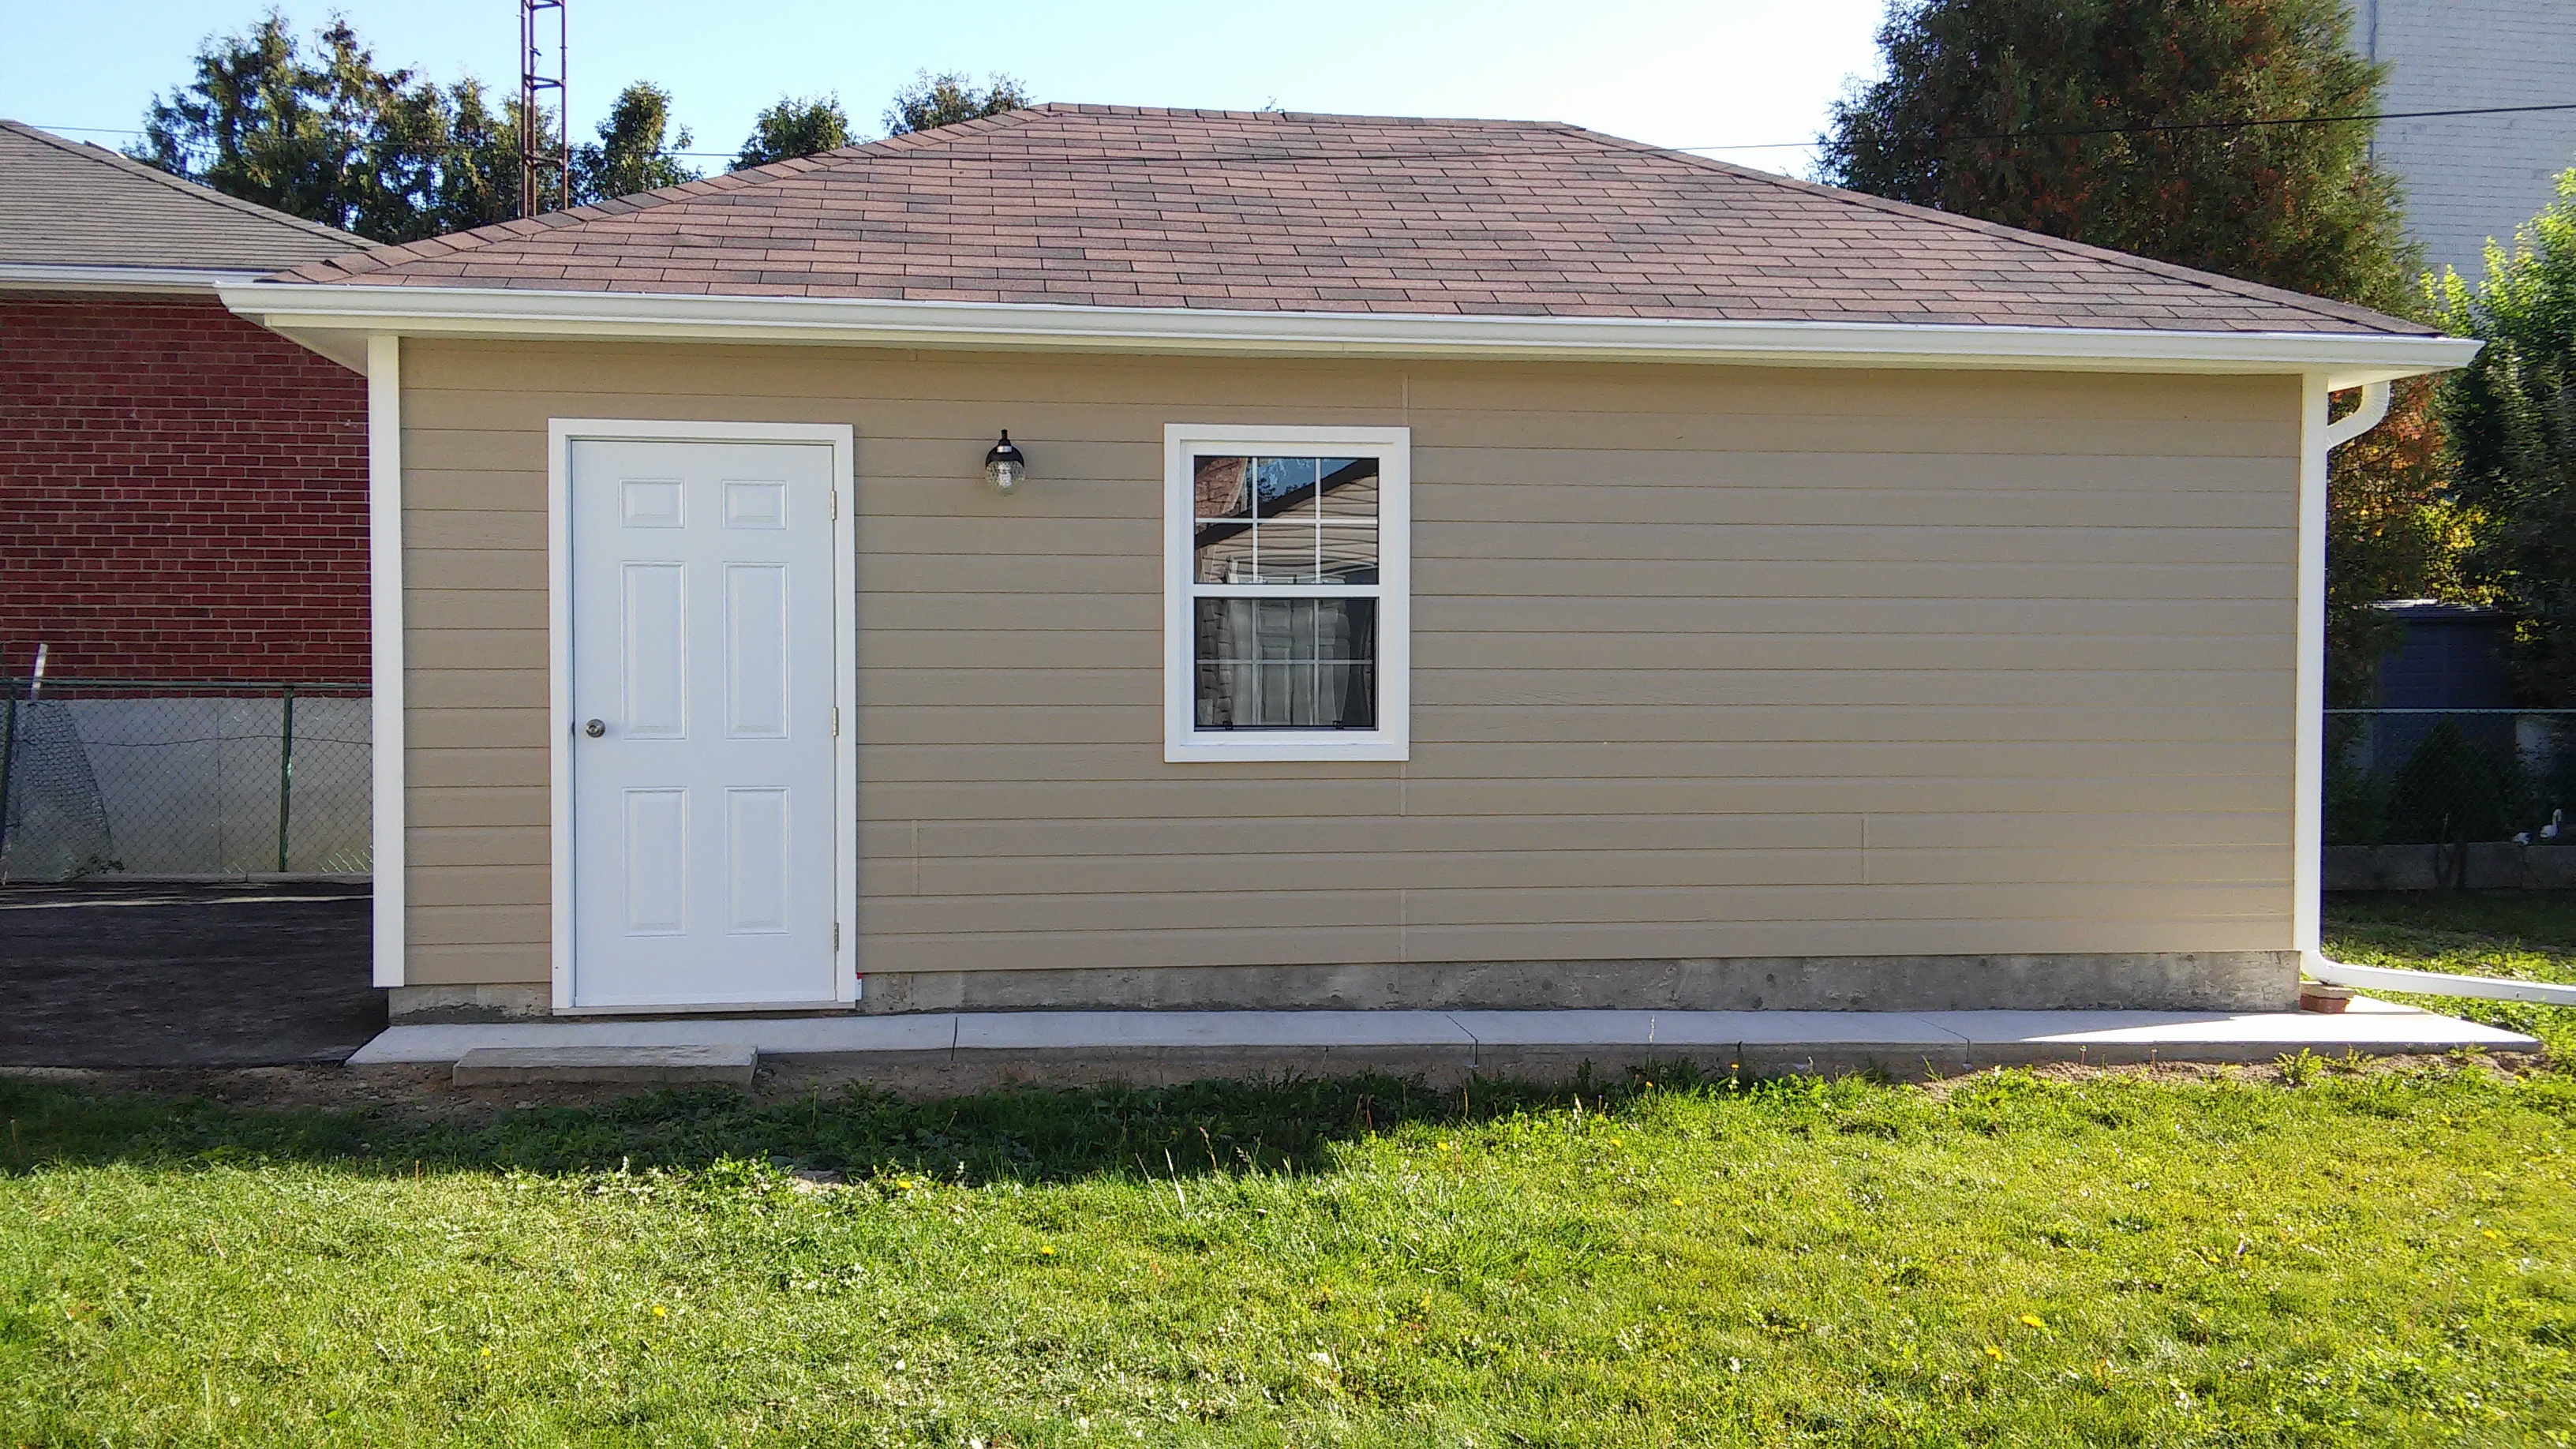 Canexel Archer 16x24 garage with large window in North York, Ontario ID number 222243